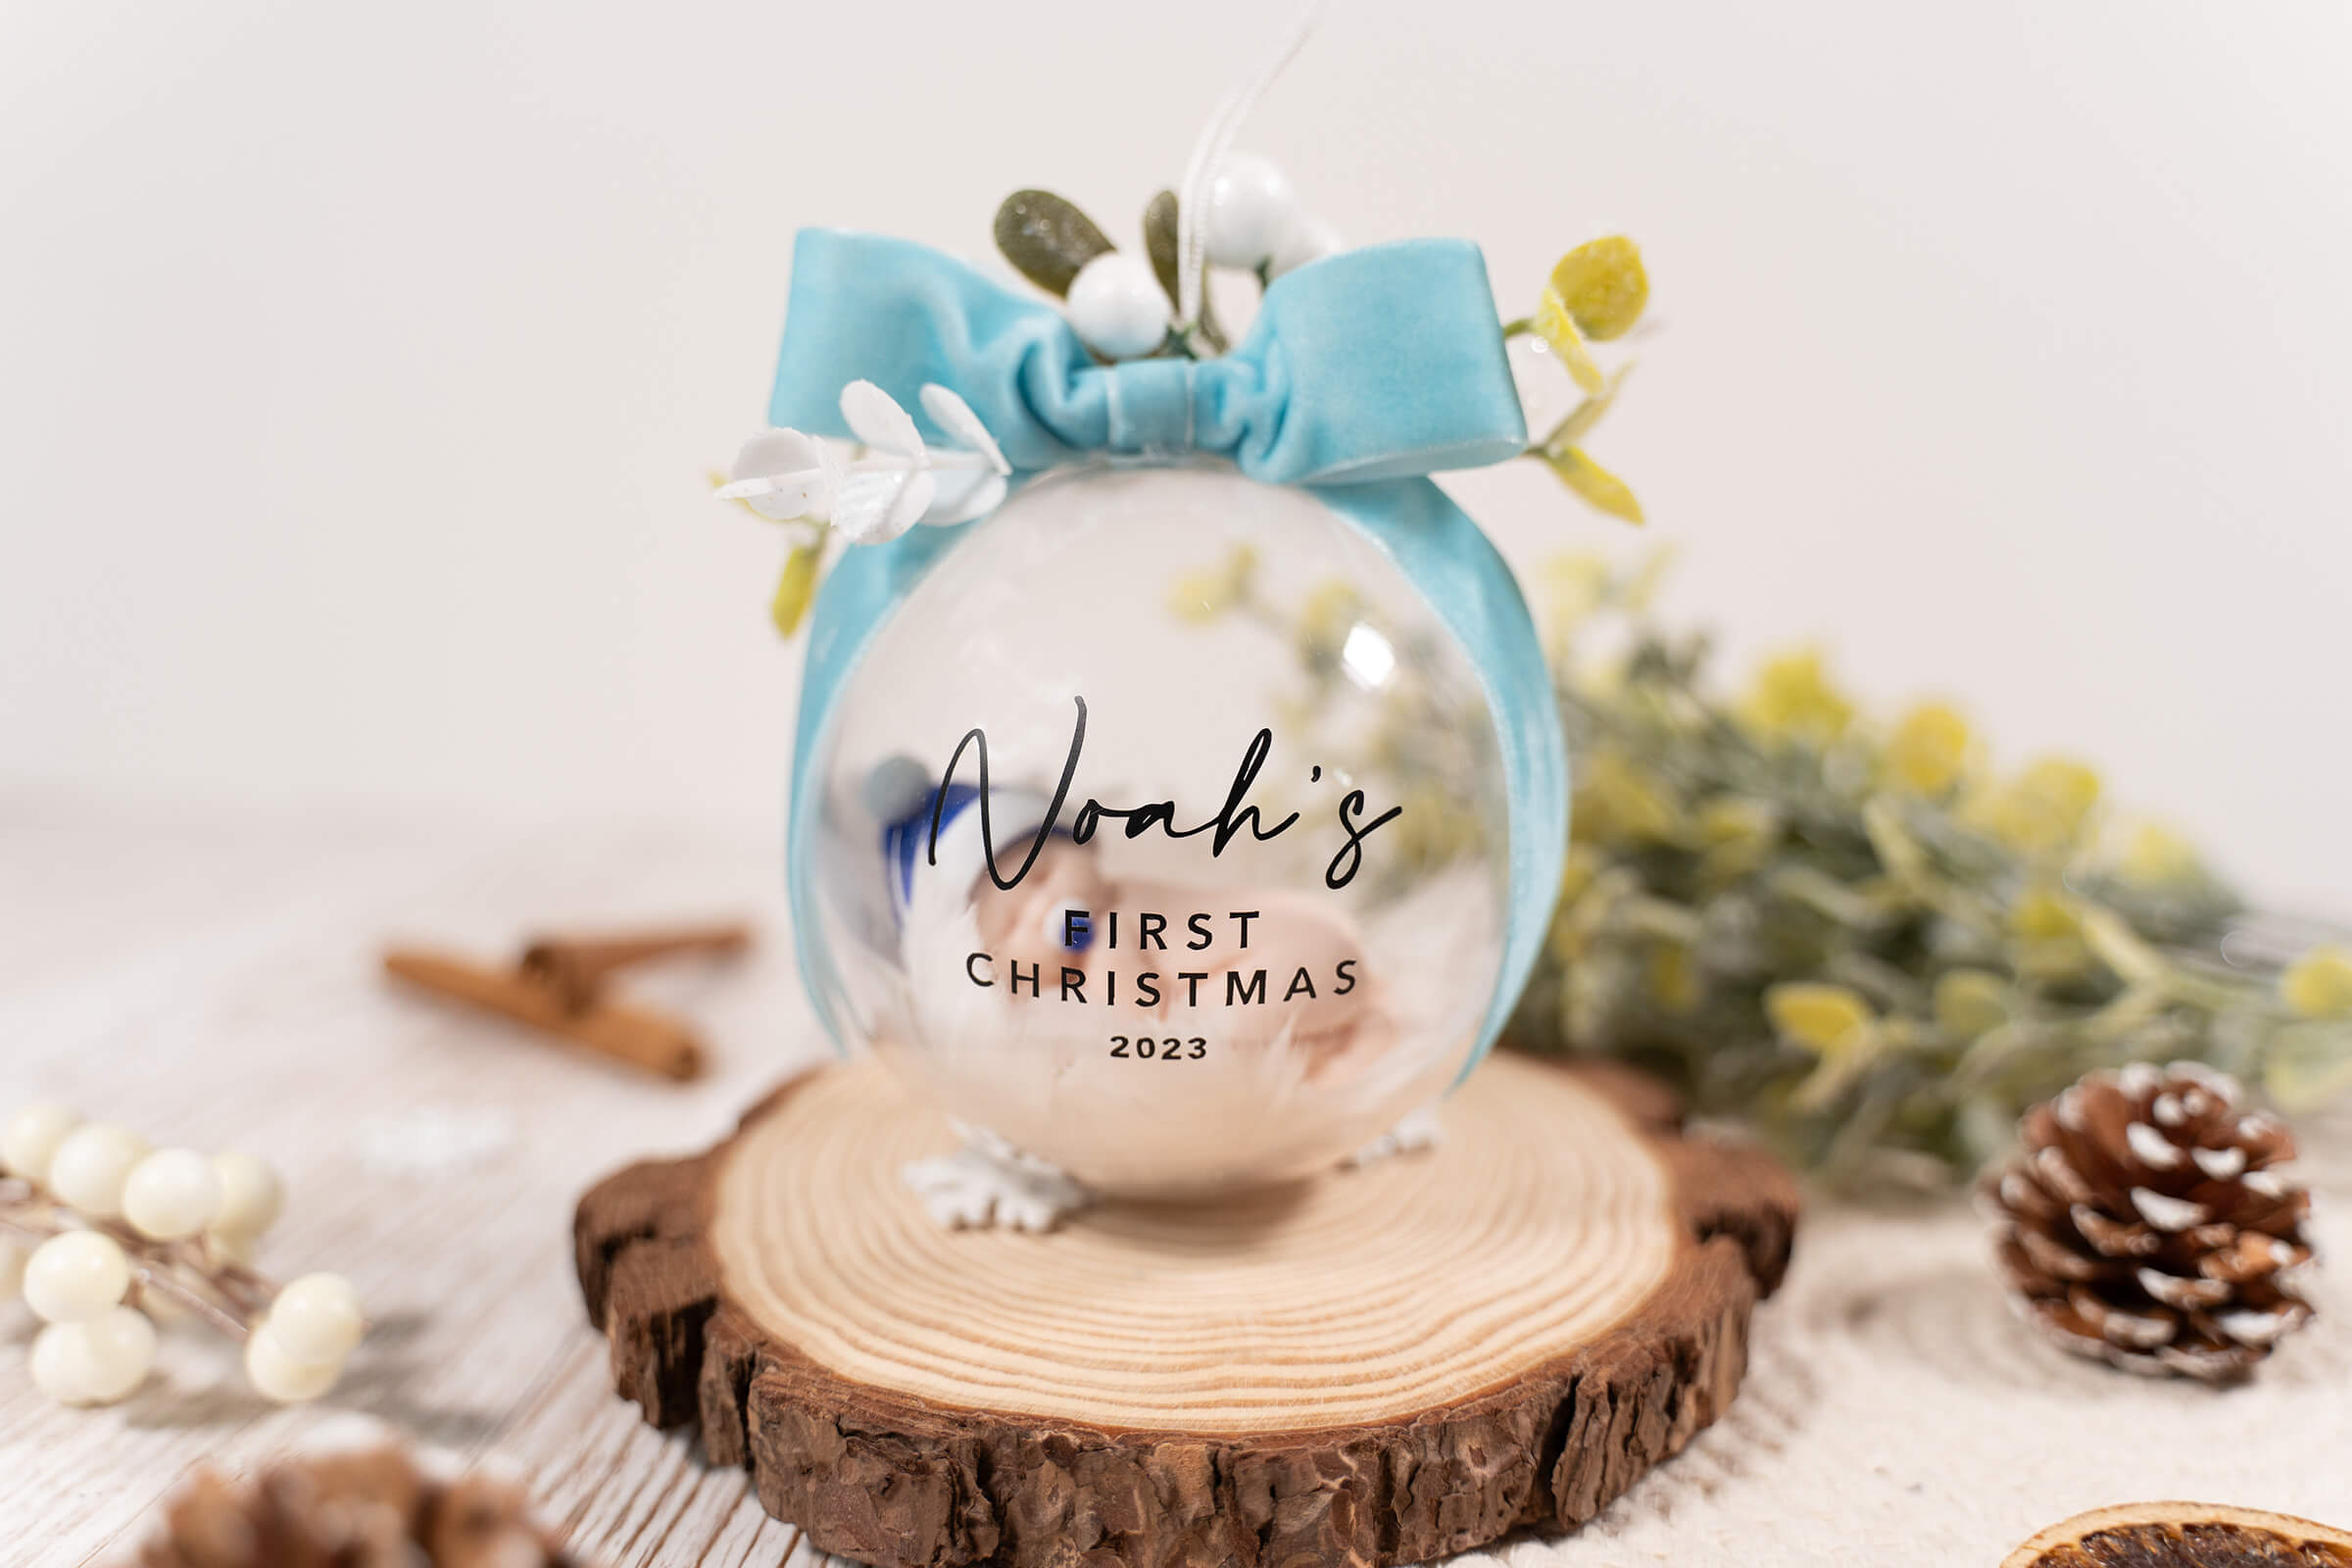 Baby's First Christmas Bauble - Blue